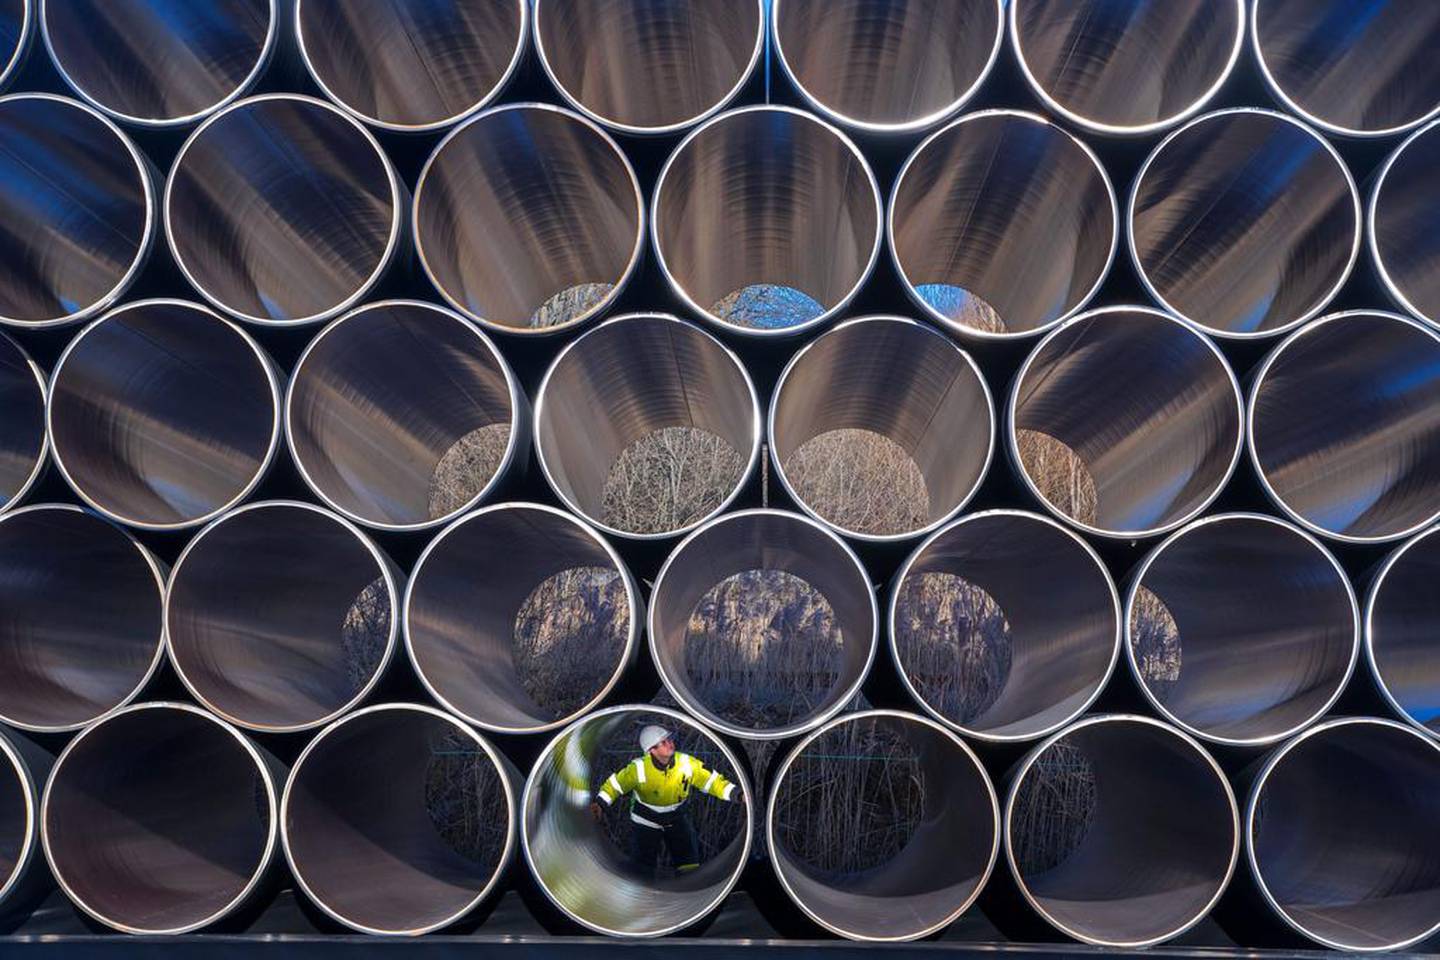 A worker inspects stacks of pipes weighing several tonnes each that will be used for the construction of the Nord Stream gas pipeline in the Sassnitz-Mukran harbour in Germany. EPA